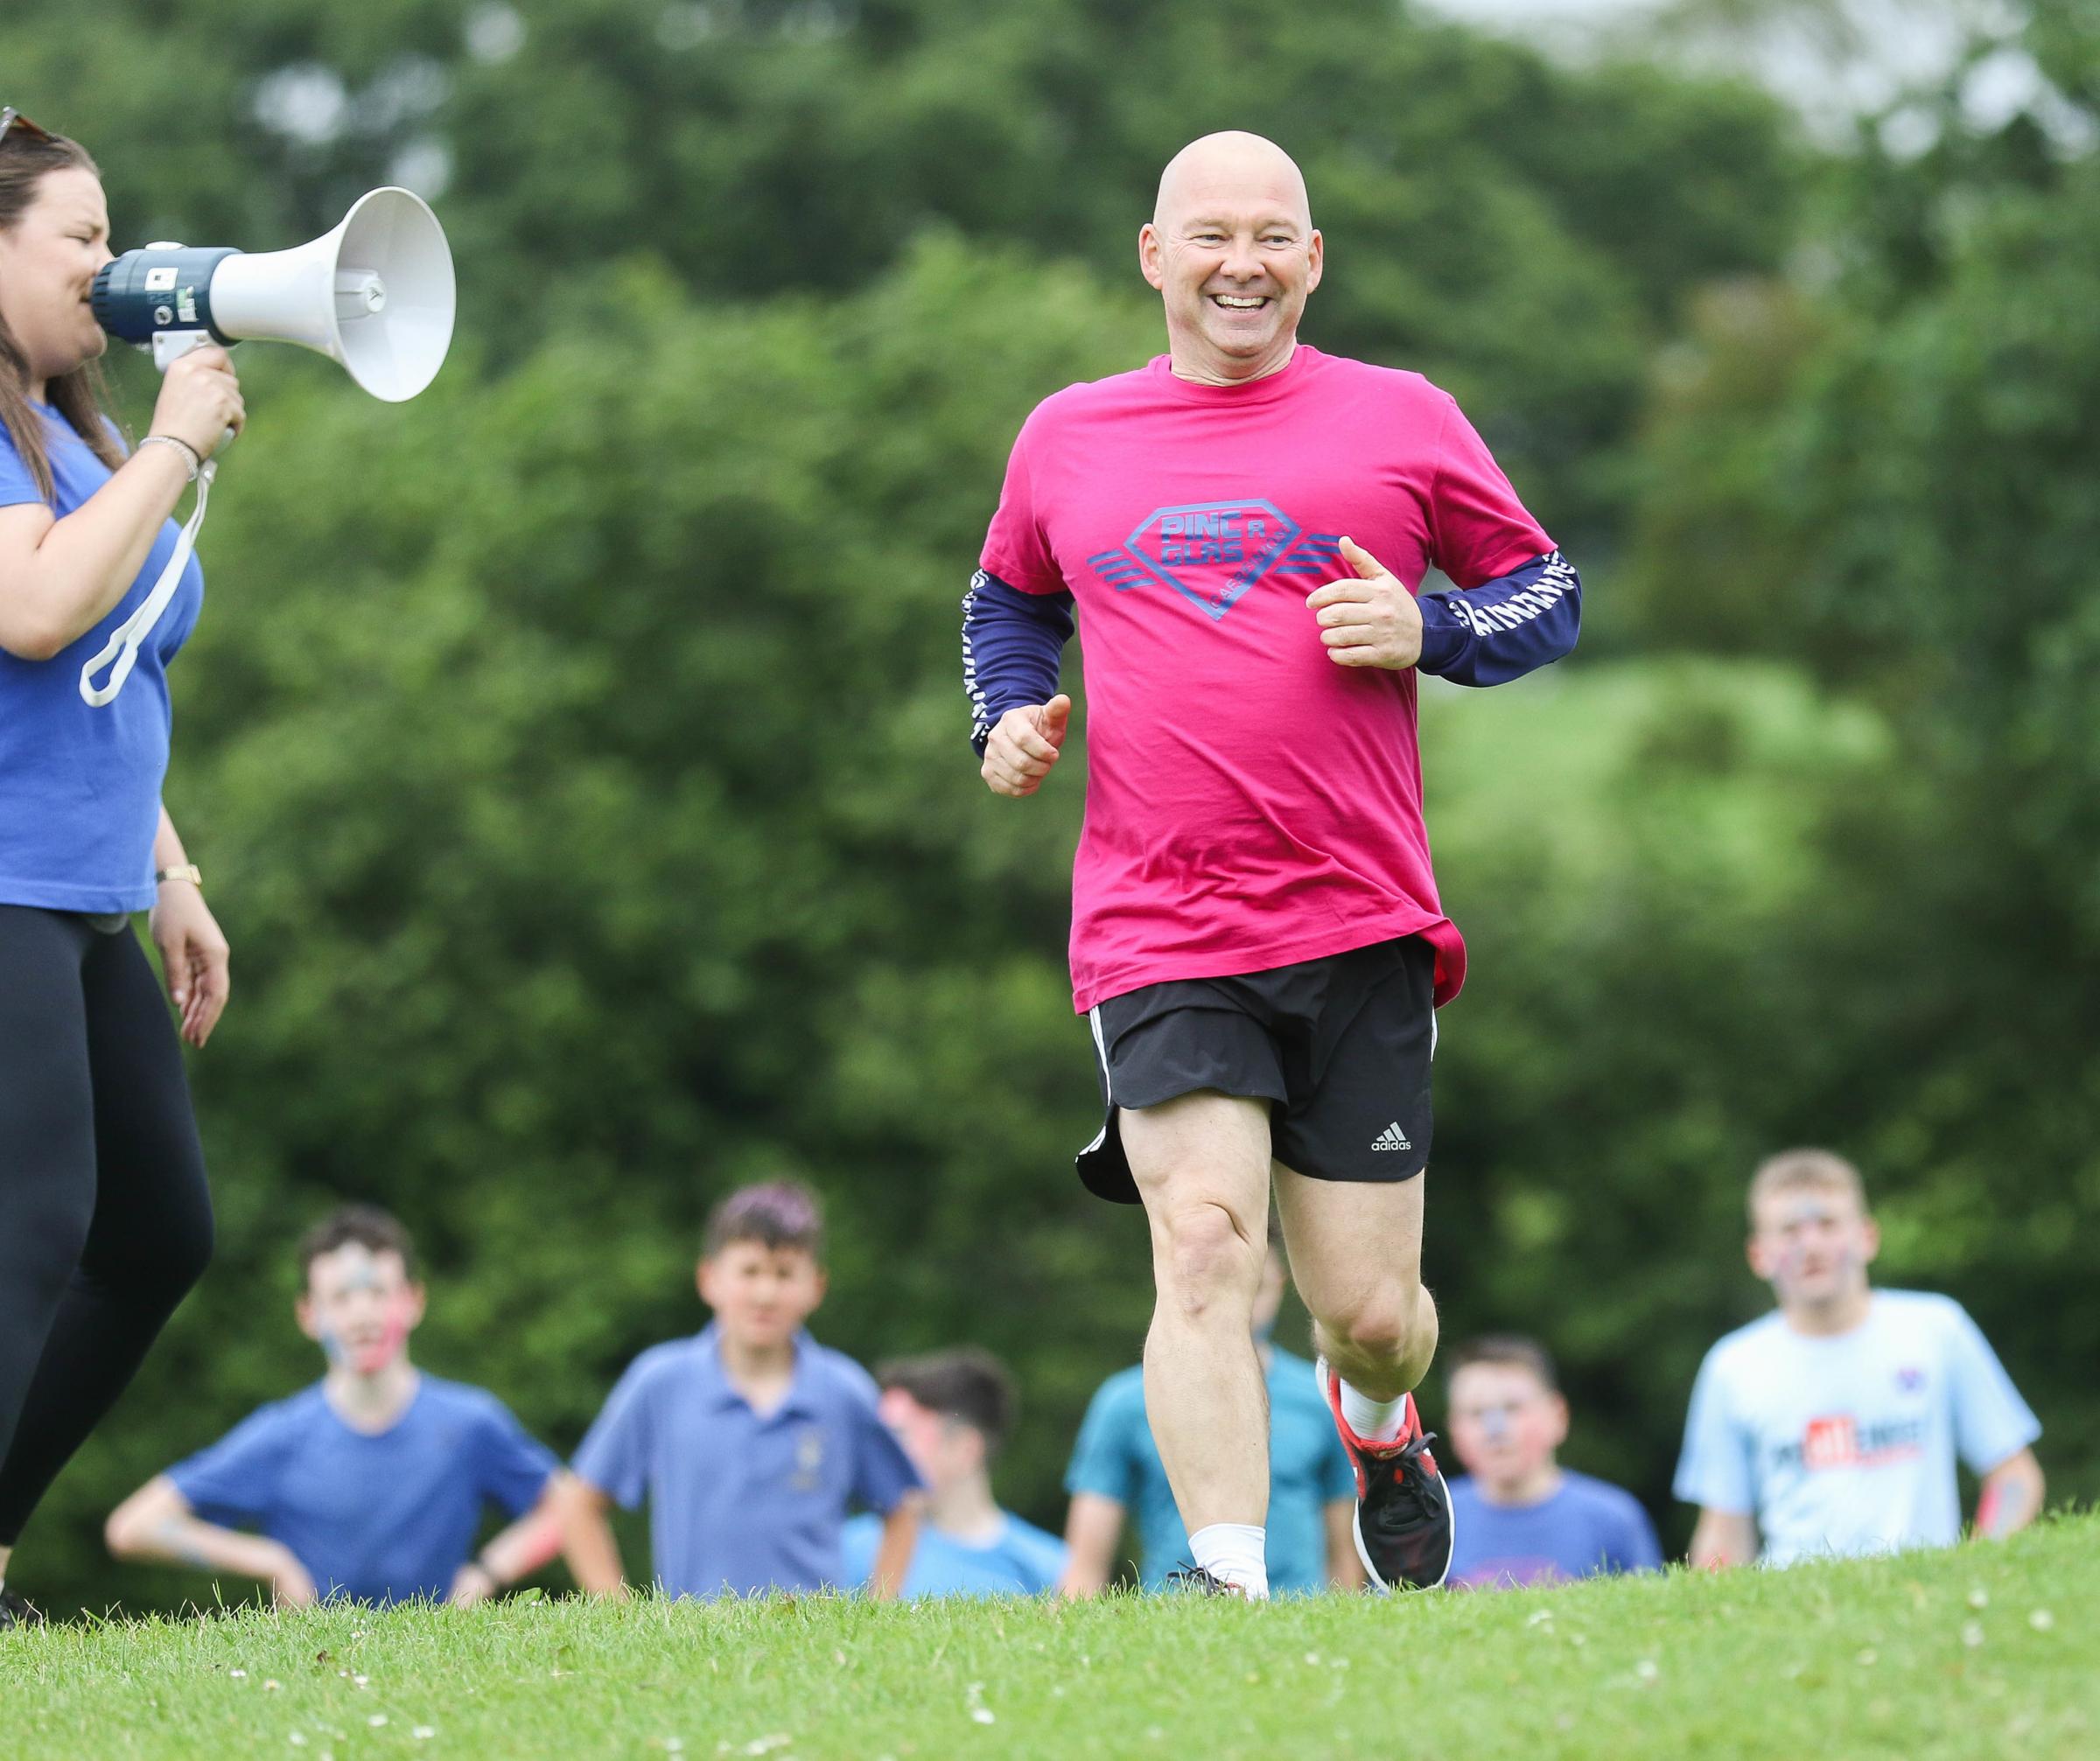 Caereinion High School pupils and staff took part in the Race For Life - Race at your Place event at the High School last Tuesday 9th July..Pictured is Headteacher Phil Jones..Picture by Phil Blagg..PB328-2019-34.